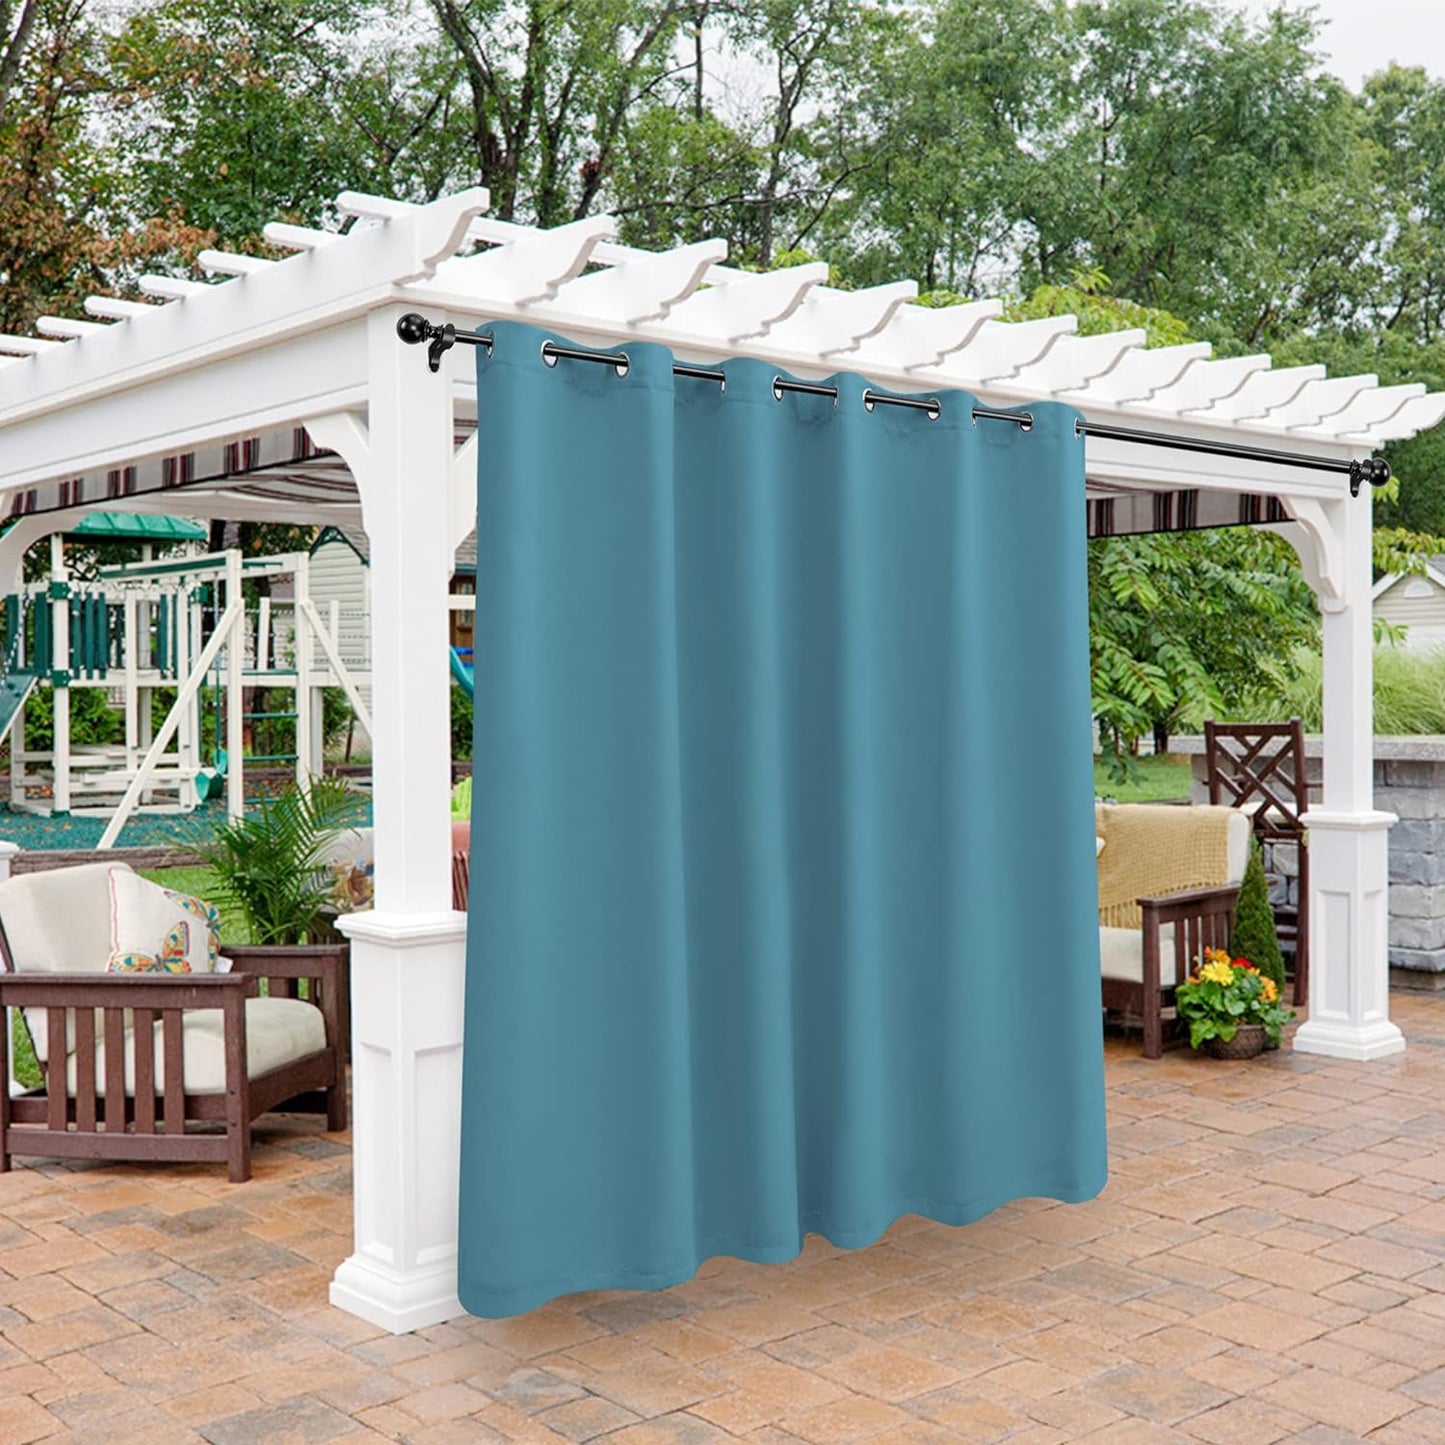 BONZER Outdoor Curtains for Patio Waterproof - Light Blocking Weather Resistant Privacy Grommet Blackout Curtains for Gazebo, Porch, Pergola, Cabana, Deck, Sunroom, 1 Panel, 52W X 84L Inch, Silver  BONZER Teal 100W X 95 Inch 